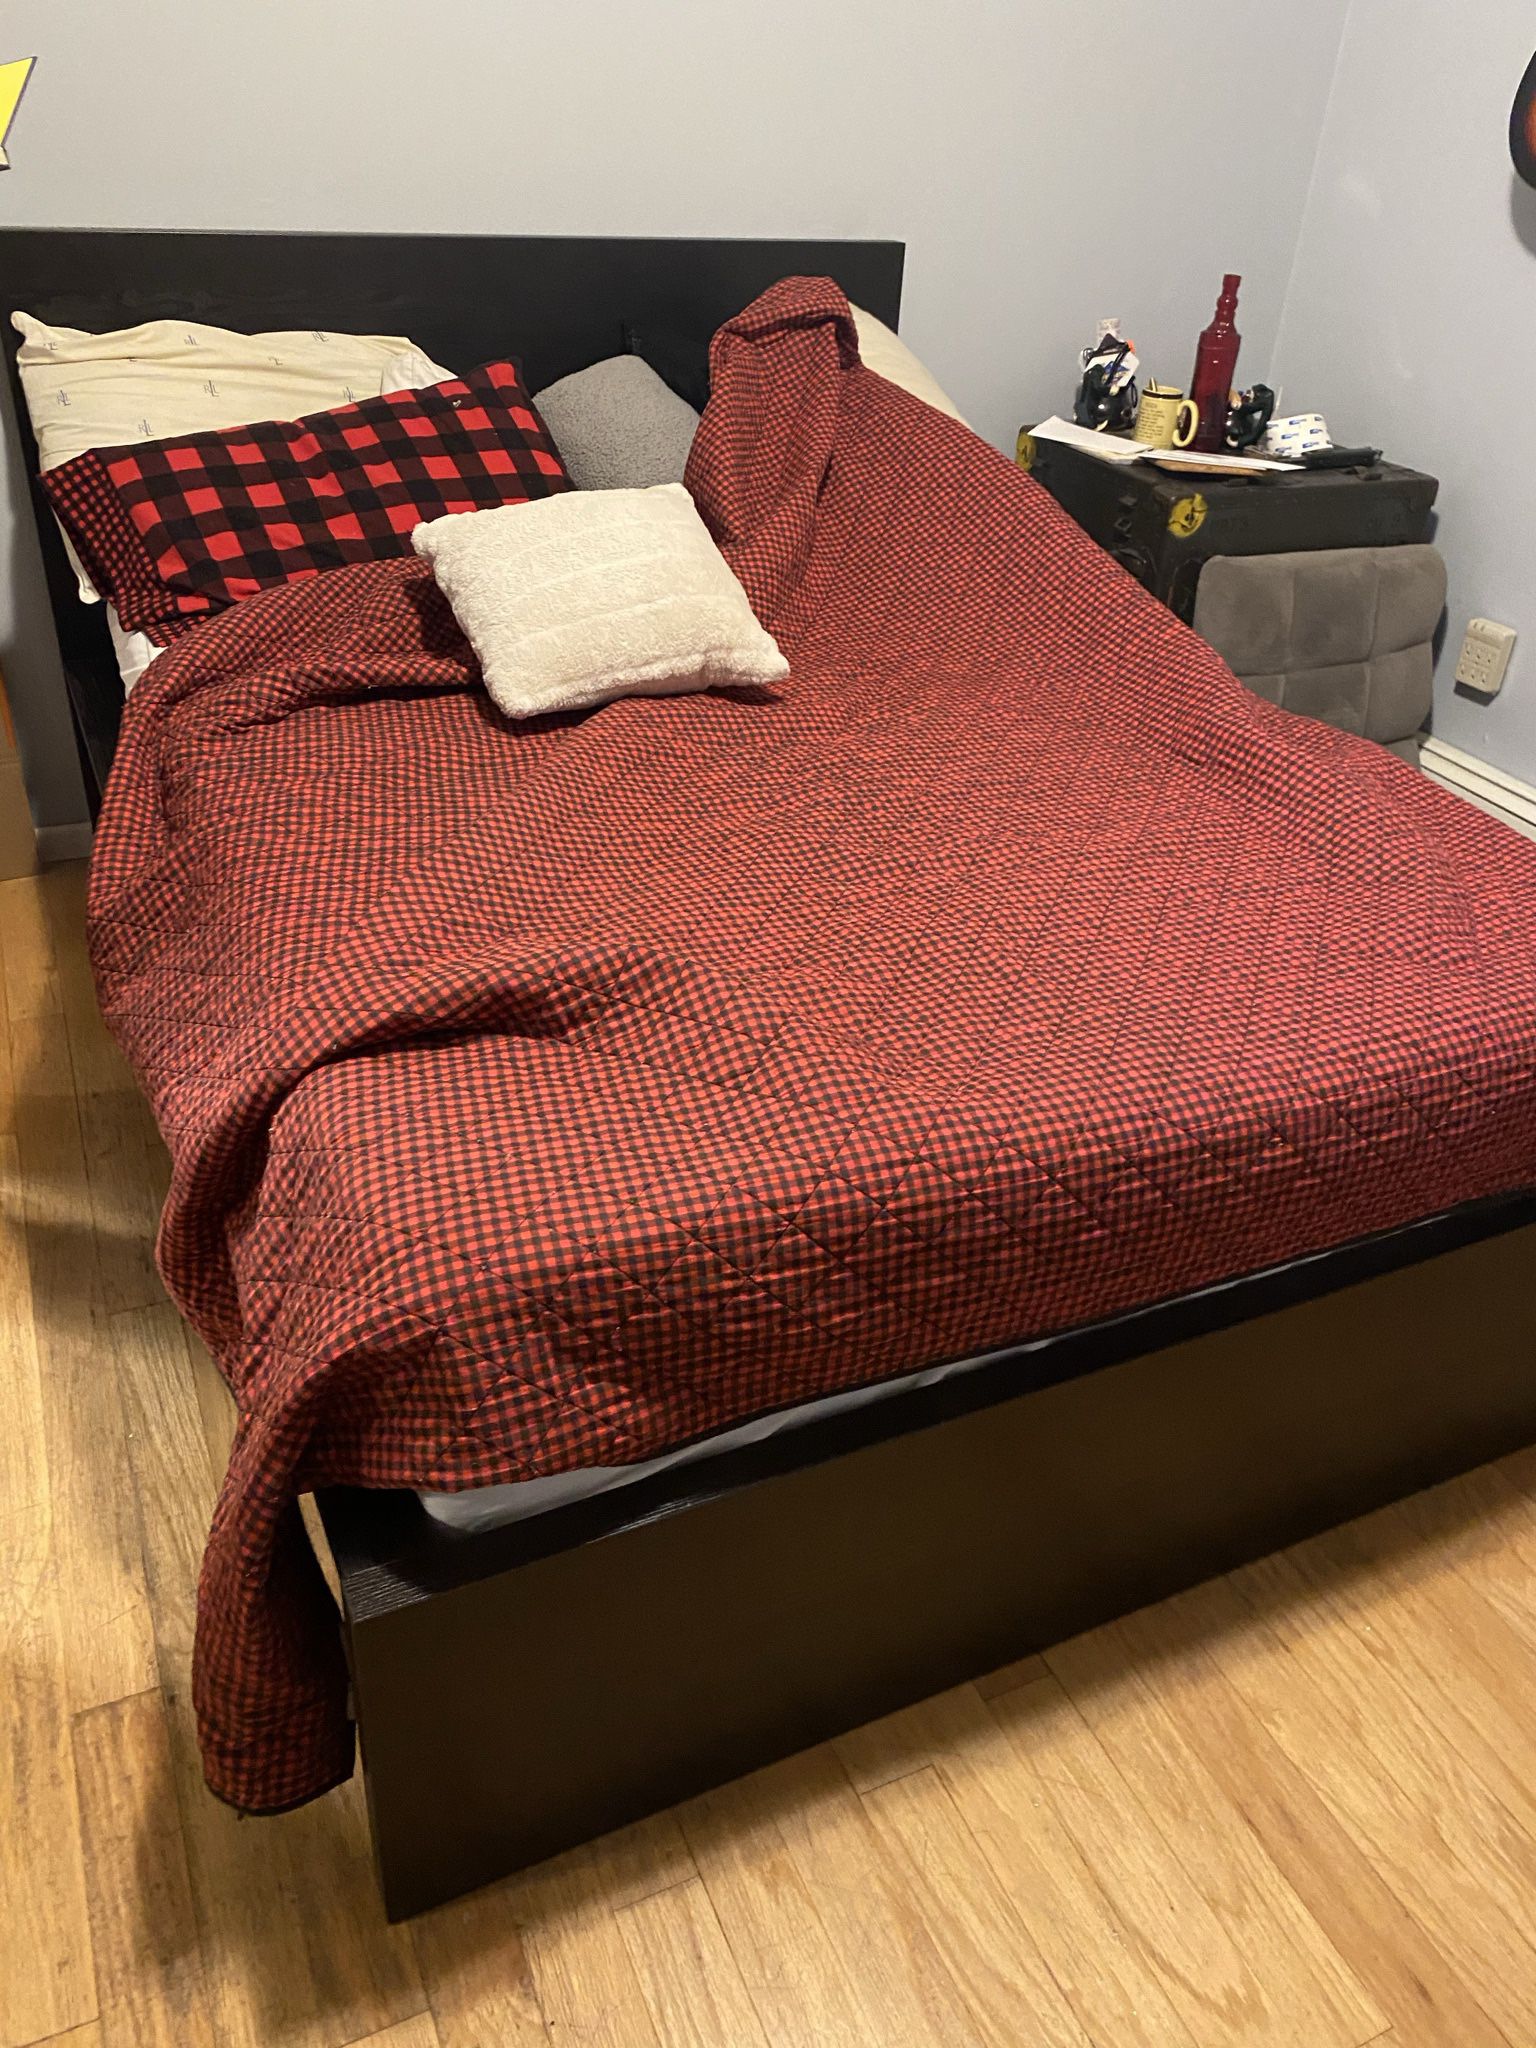 Full Size Bed Frame With Slats